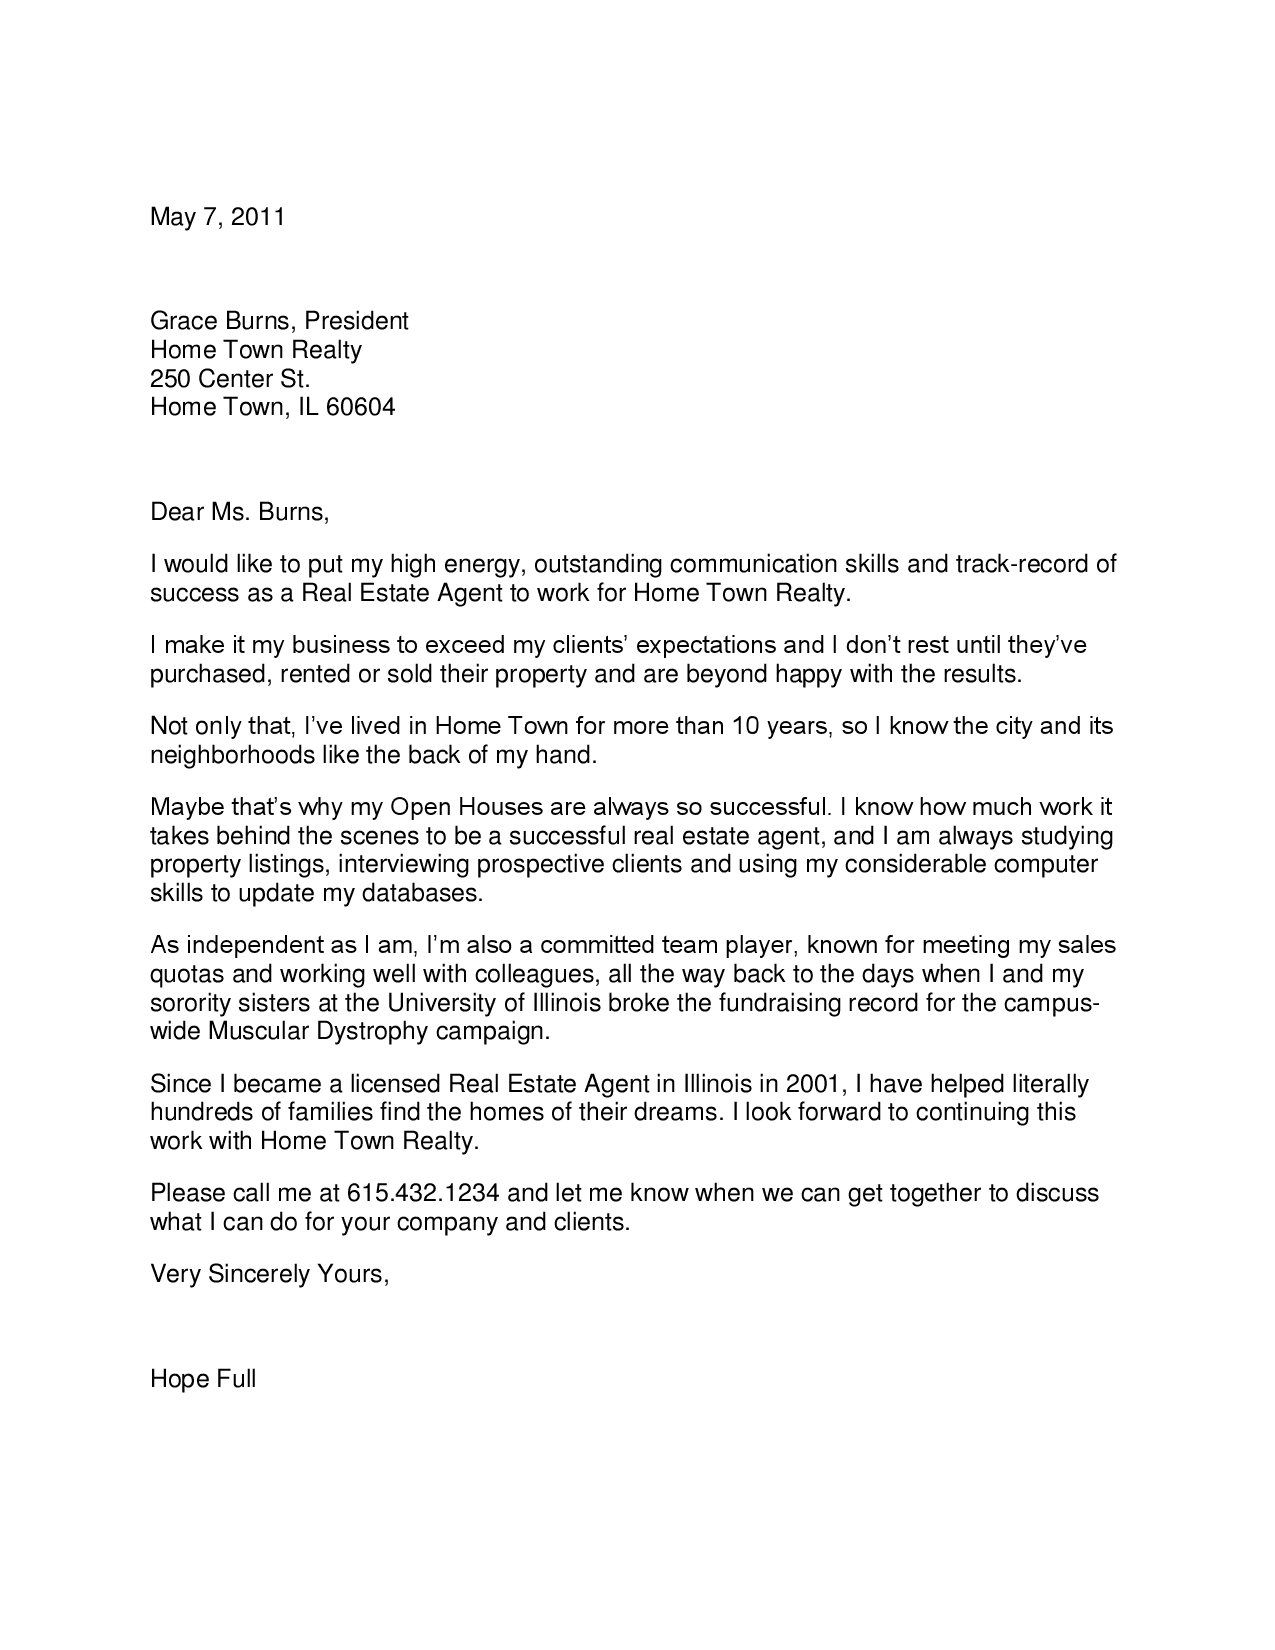 cover letter for real estate position